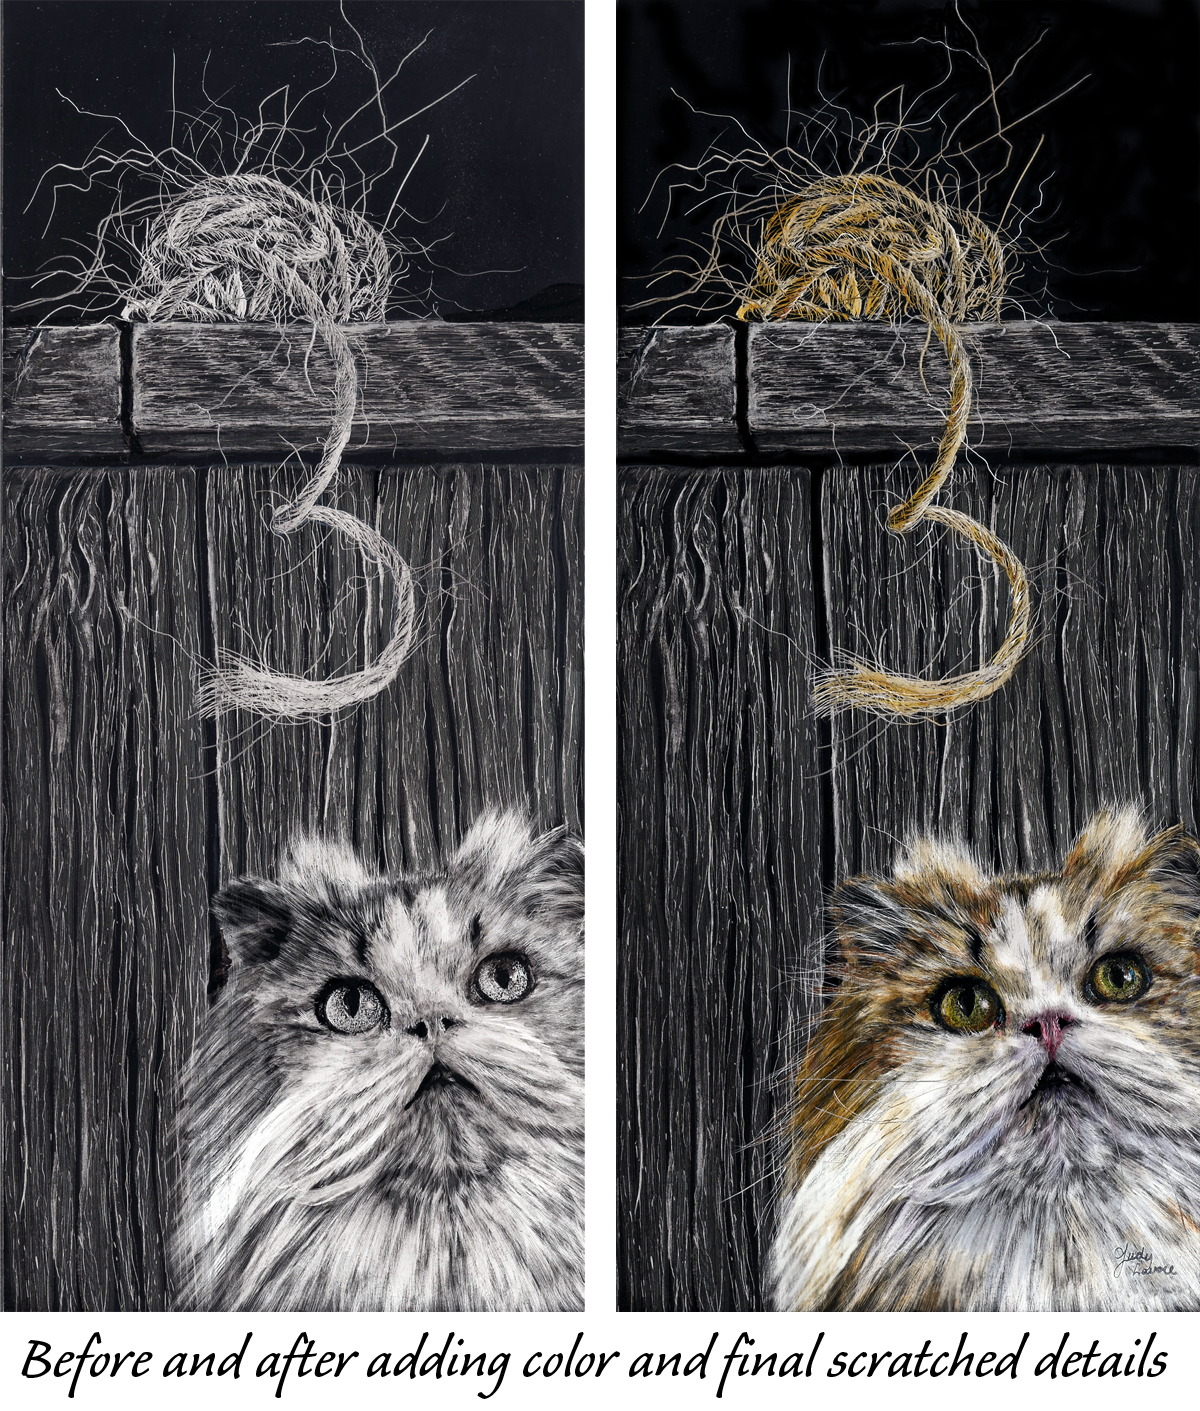 Two versions of "Curious" to illustrate the addition of color to a scratchboard